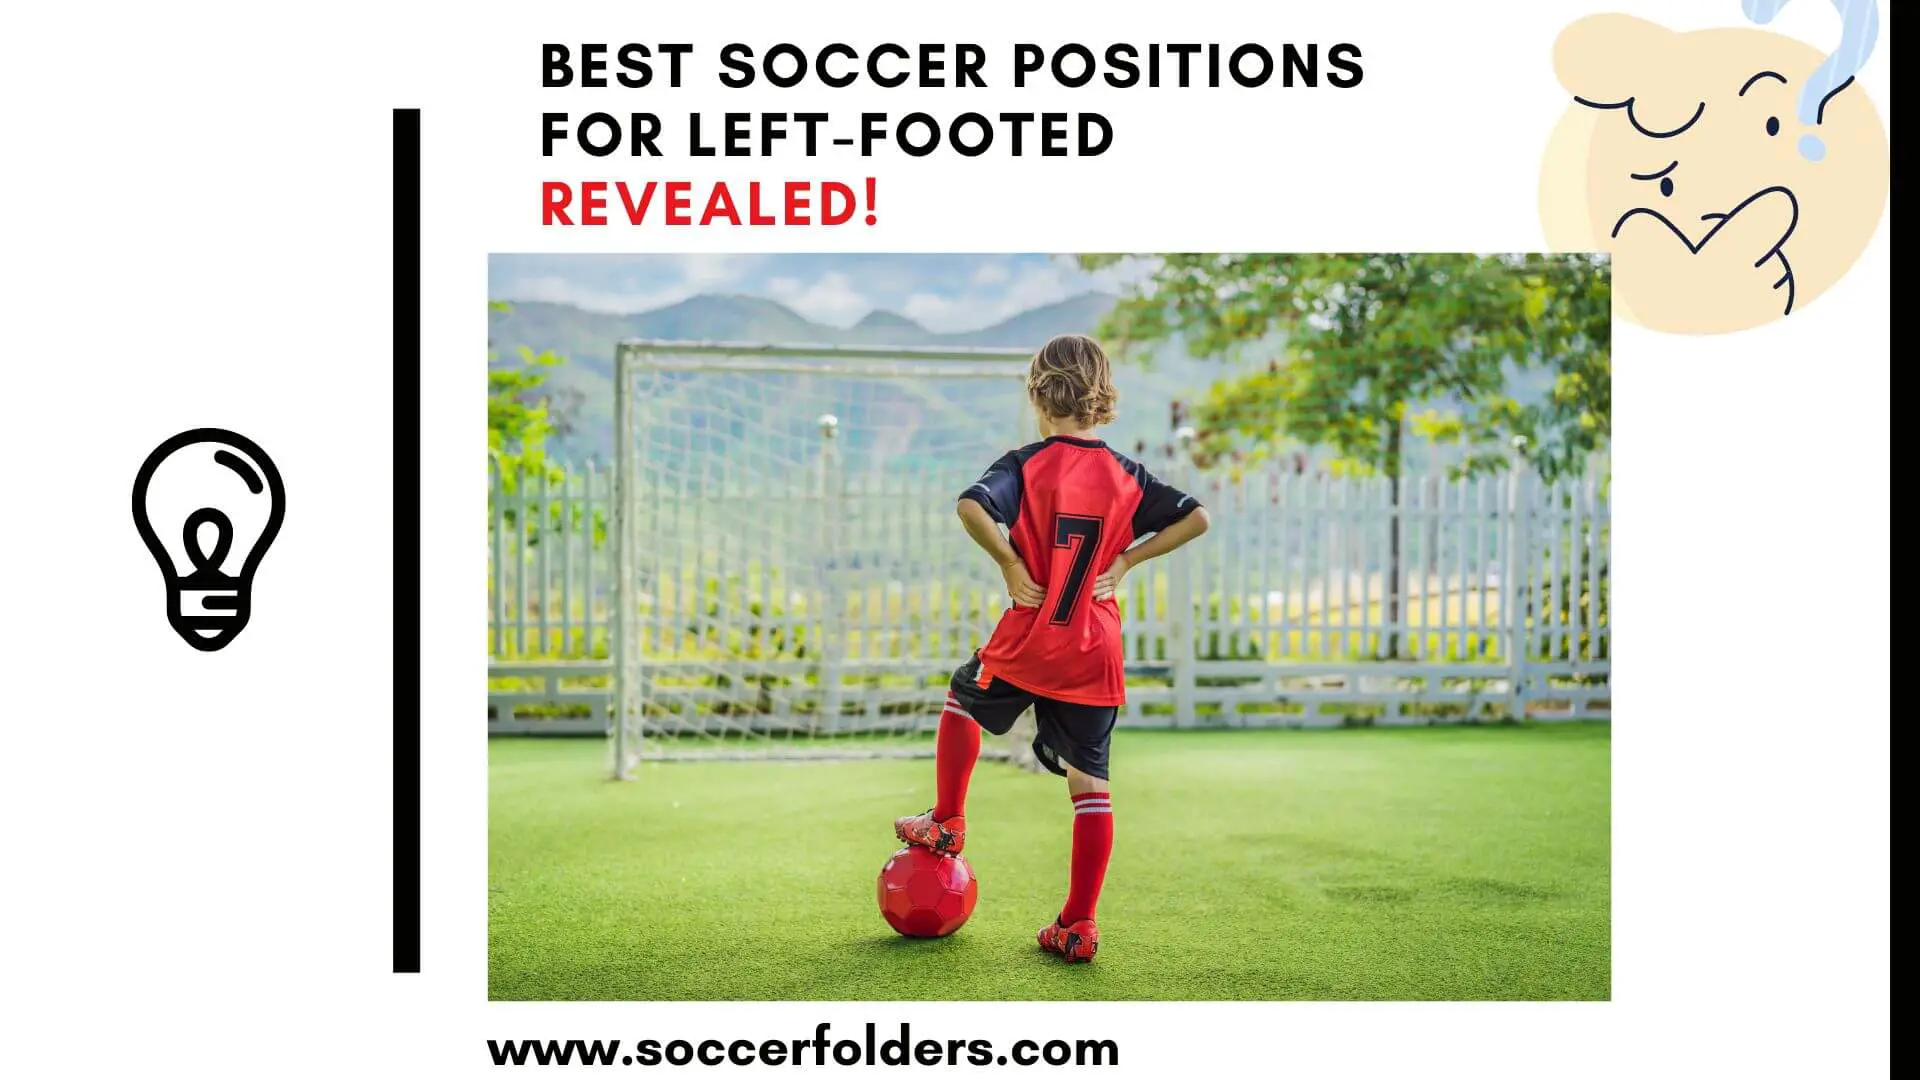 Best soccer positions for left footed players - Featured image